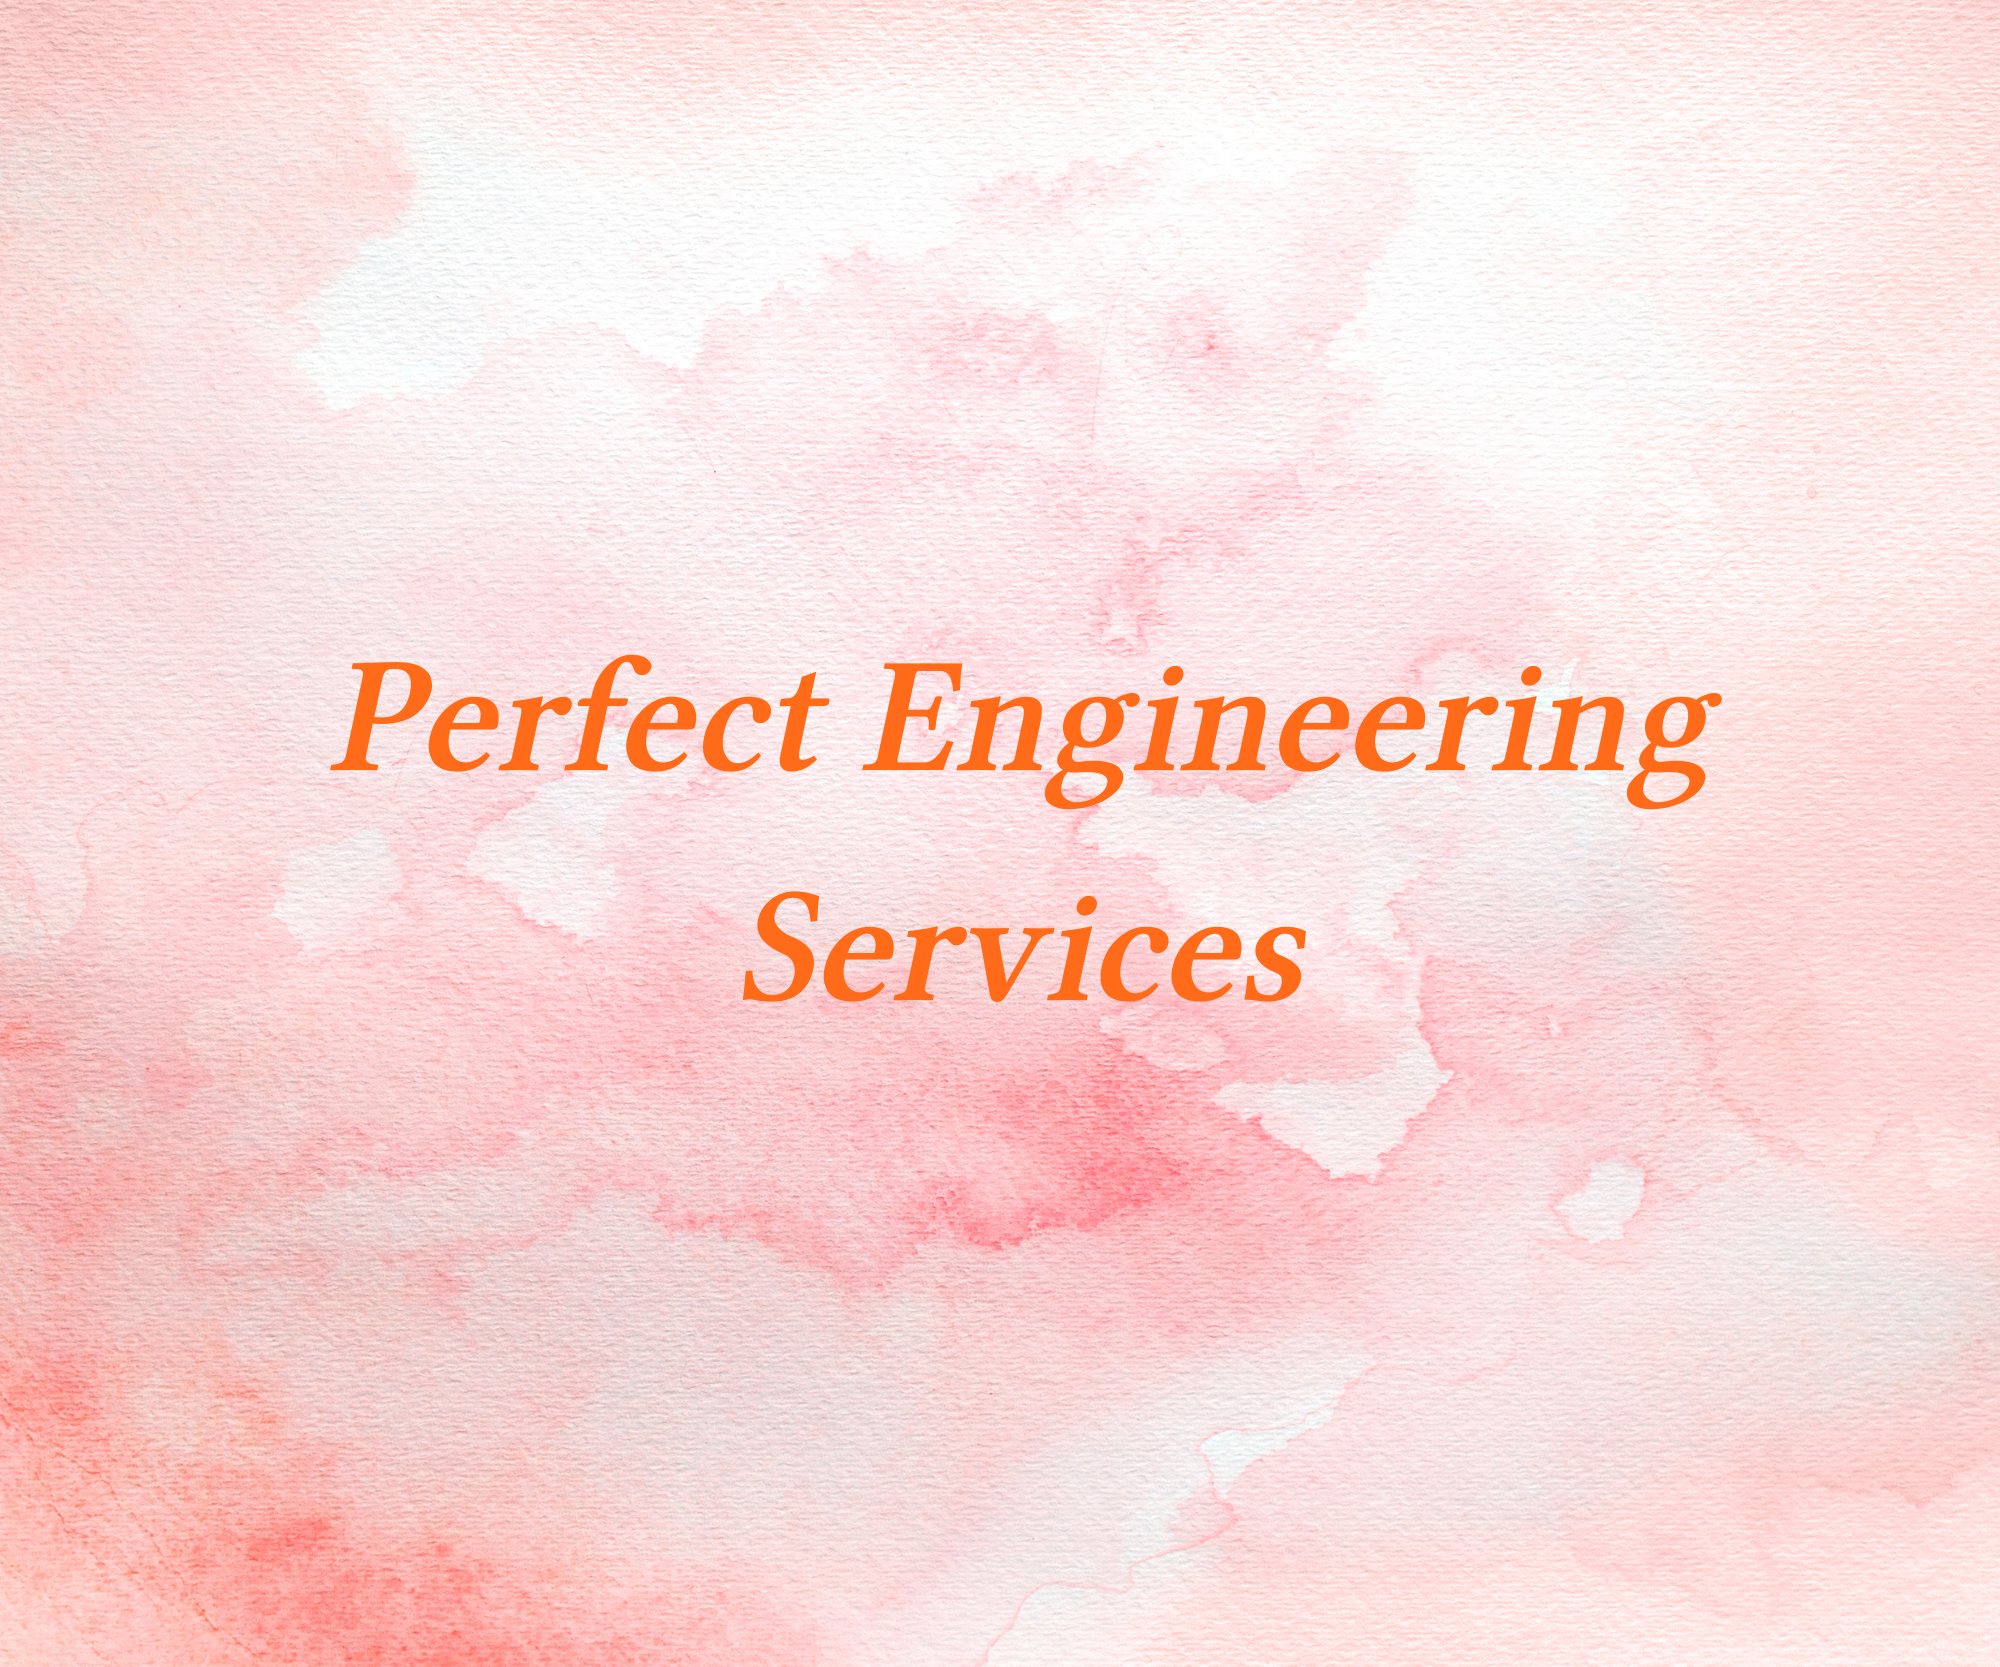 Perfect Engineering Services,   